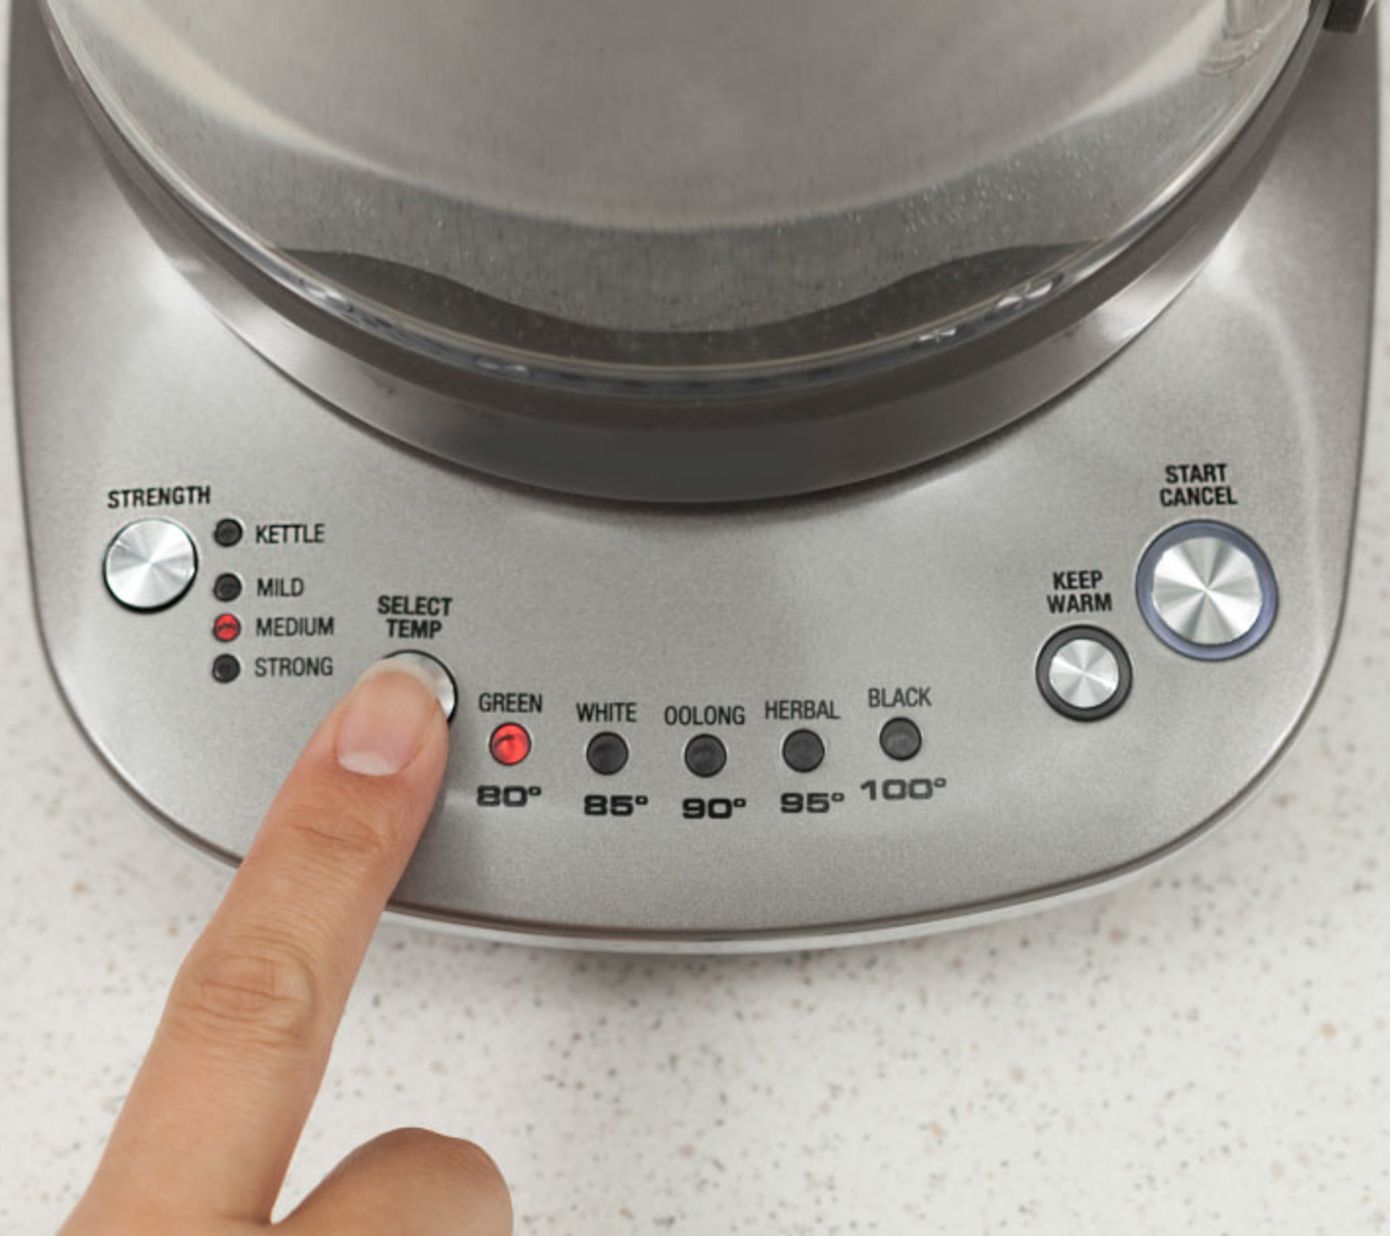 Breville Variable-Temperature Kettle